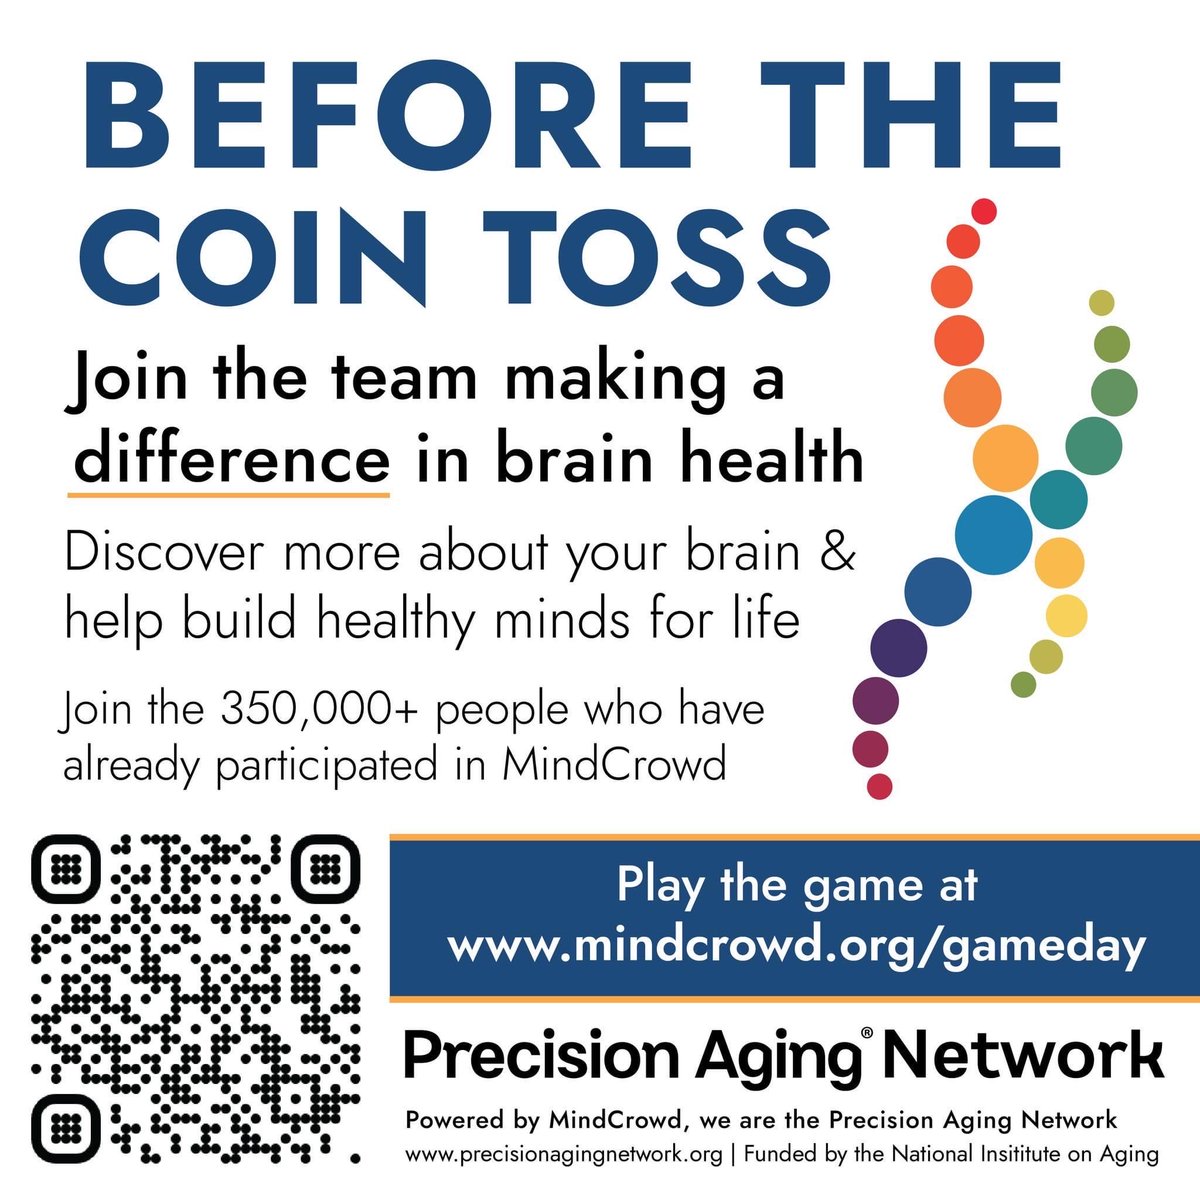 The Eagles and the Chiefs have been training all season, but are you ready? Get your game face on and kick off your memory skills by playing our game at mindcrowd.org/gameday #azsuperbowl #SuperBowl ⁦@JH_Memory_Aging⁩ ⁦@UMiamiMBI⁩ ⁦⁦@TGenMINDCROWD⁩